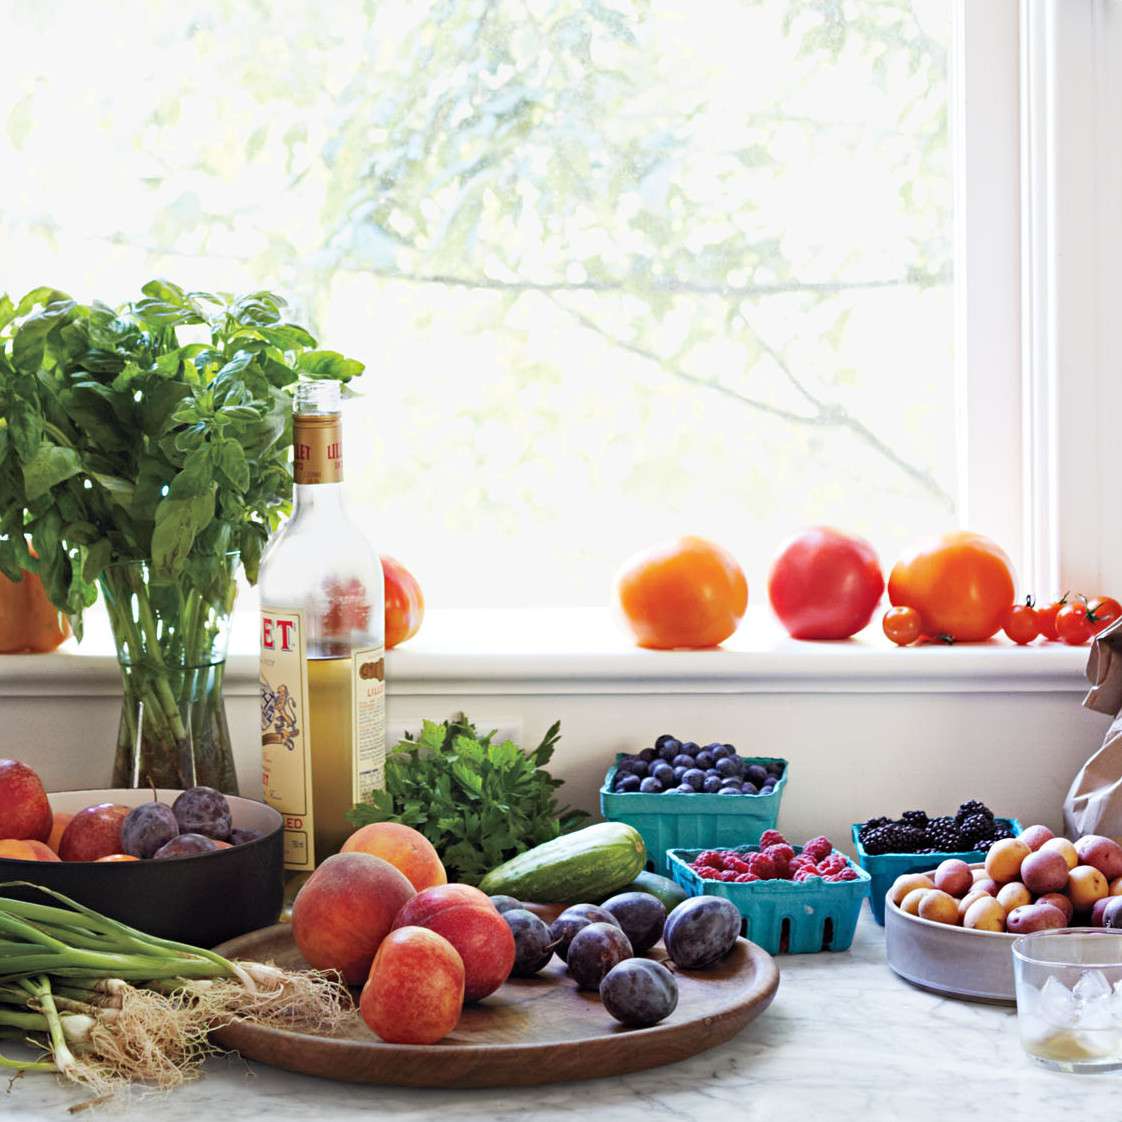 Fruits and vegetables on kitchen counter and window ledge